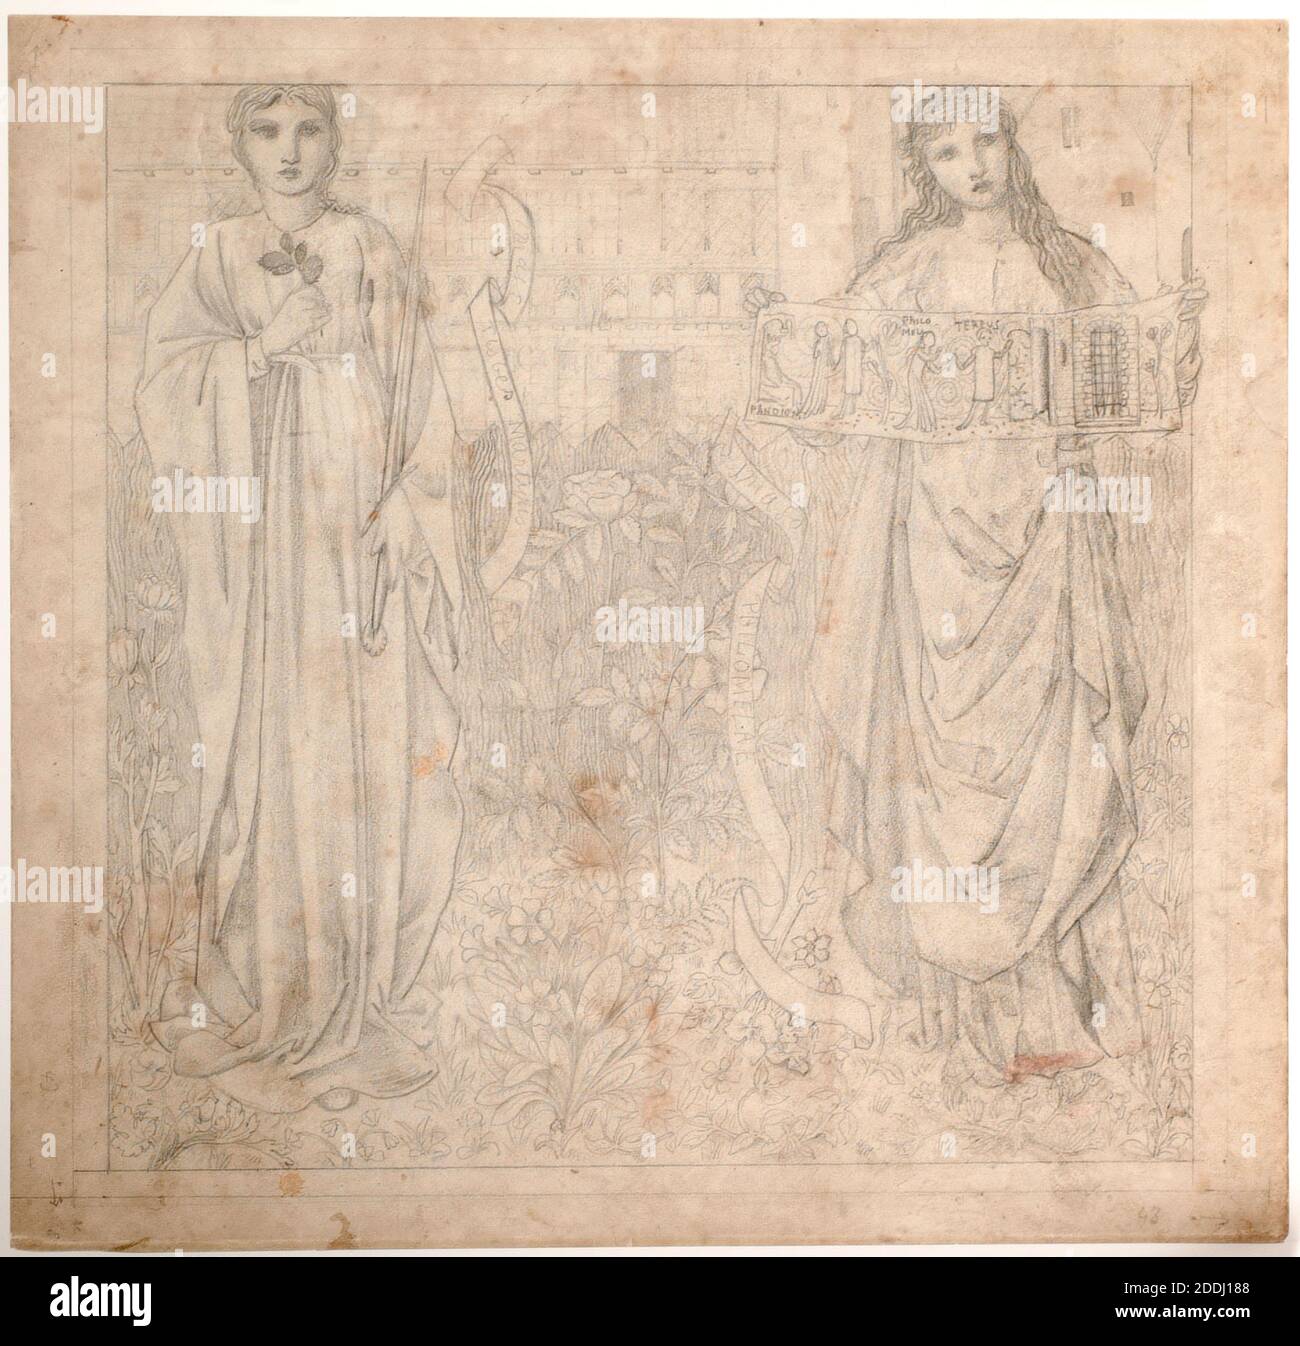 Chaucer's 'Legend of Good Women', Thisbe and Philomela, 1864 Sir Edward Burne-Jones, Design for stained glass, Drawing, Pencil, Pre-Raphaelite, Design Stock Photo